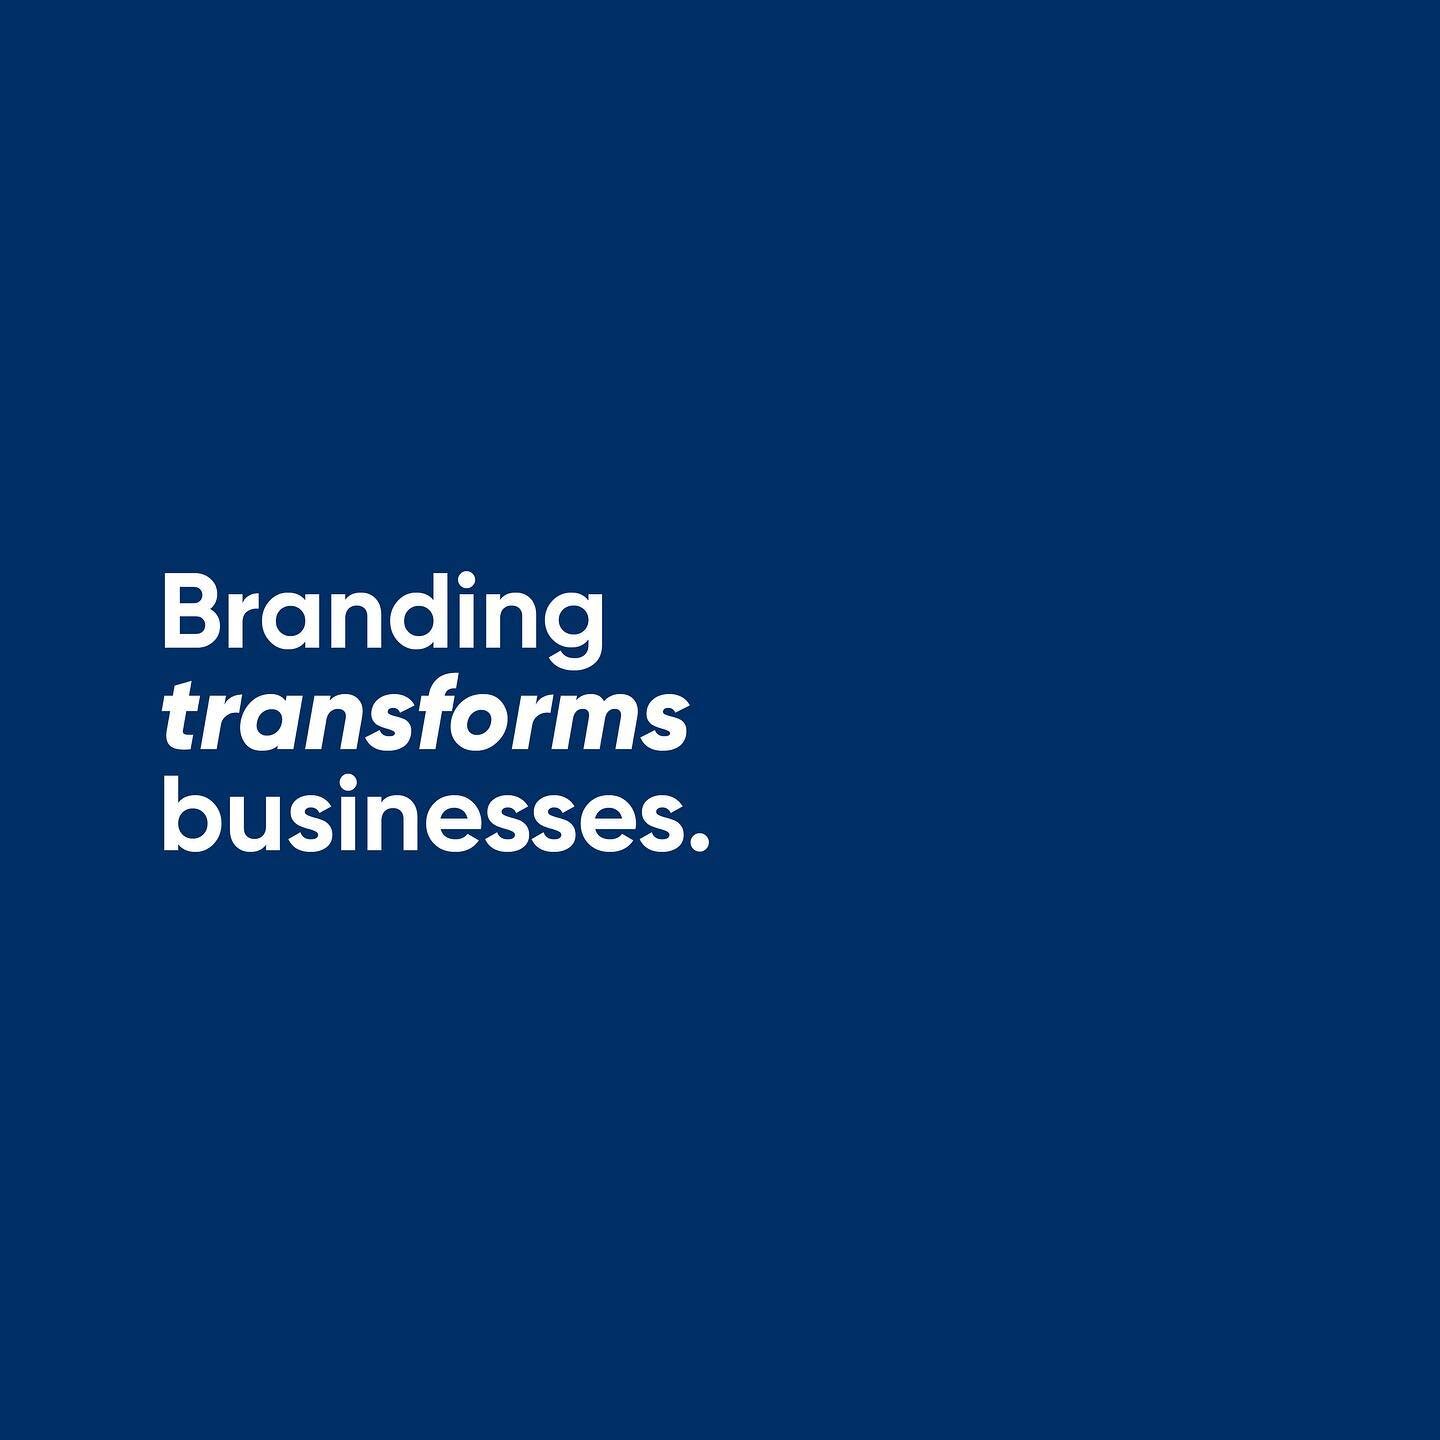 Branding in itself is pretty complex to talk about but the simplest and most effective power it has is simply to transform. Sounds easy enough right? But the one thing many new businesses and even existing businesses overlook if things are not going 